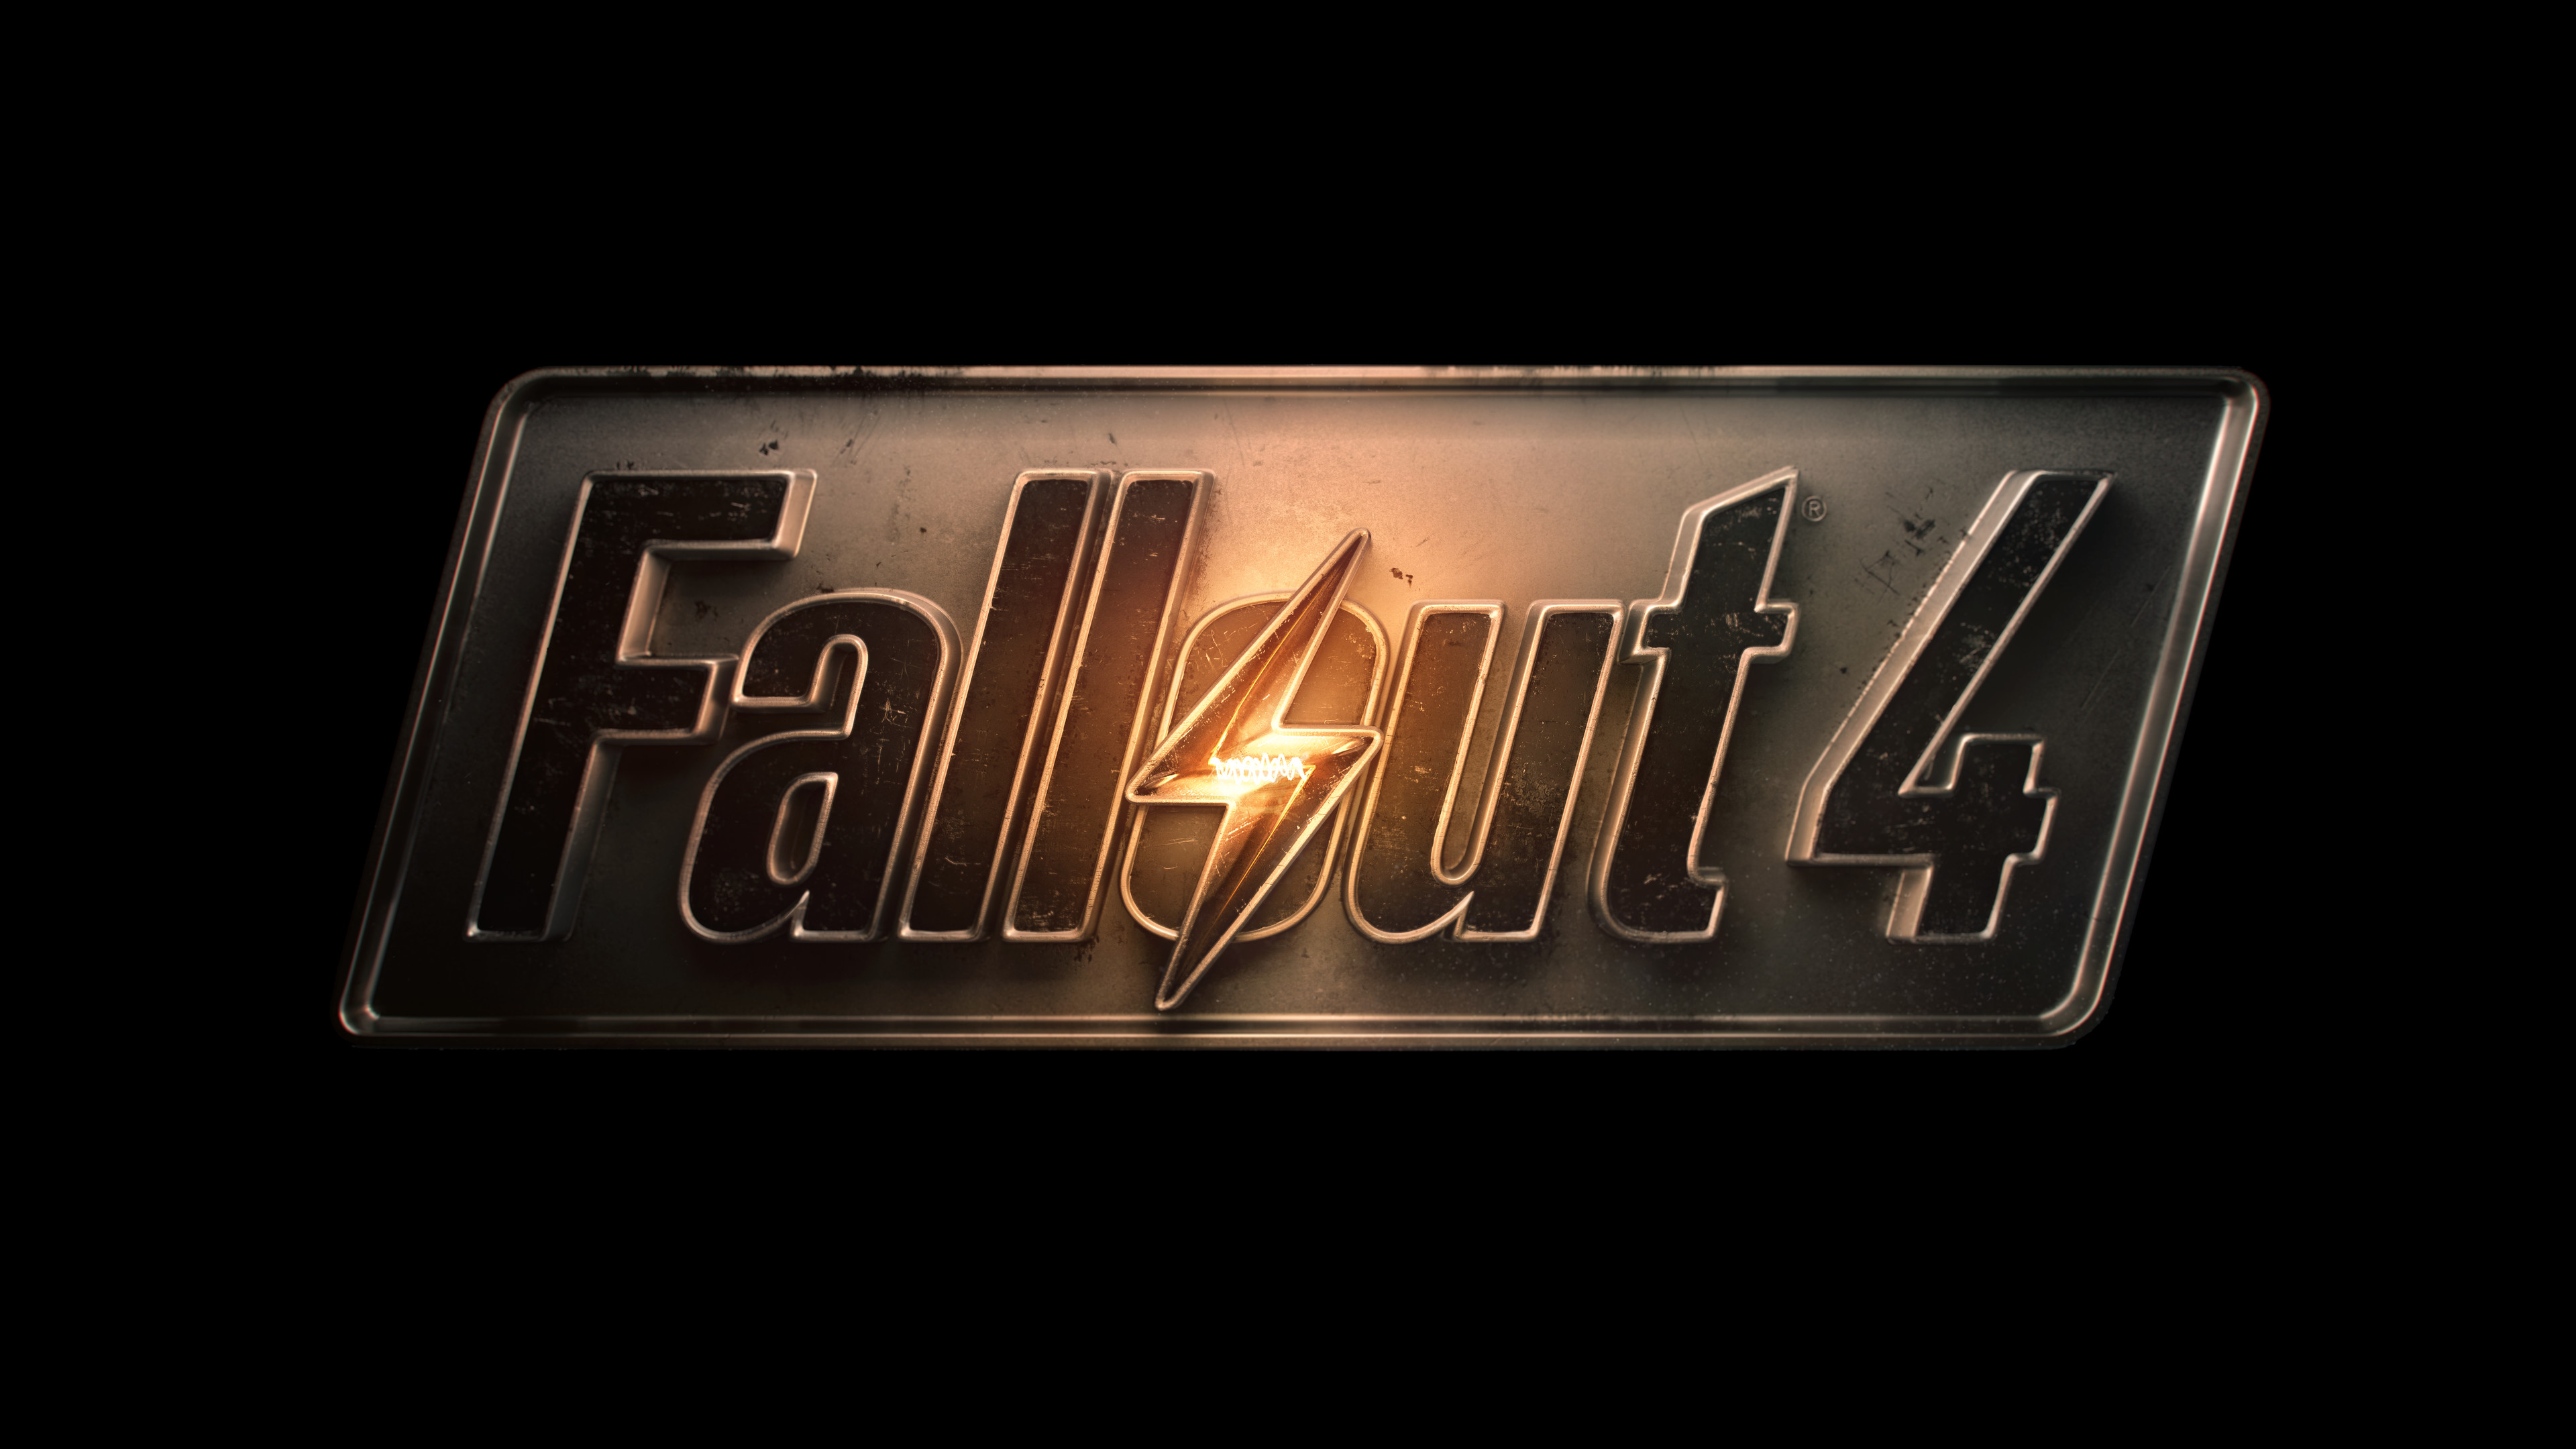 3840x2160 Fallout 4 Wallpapers Full Hd